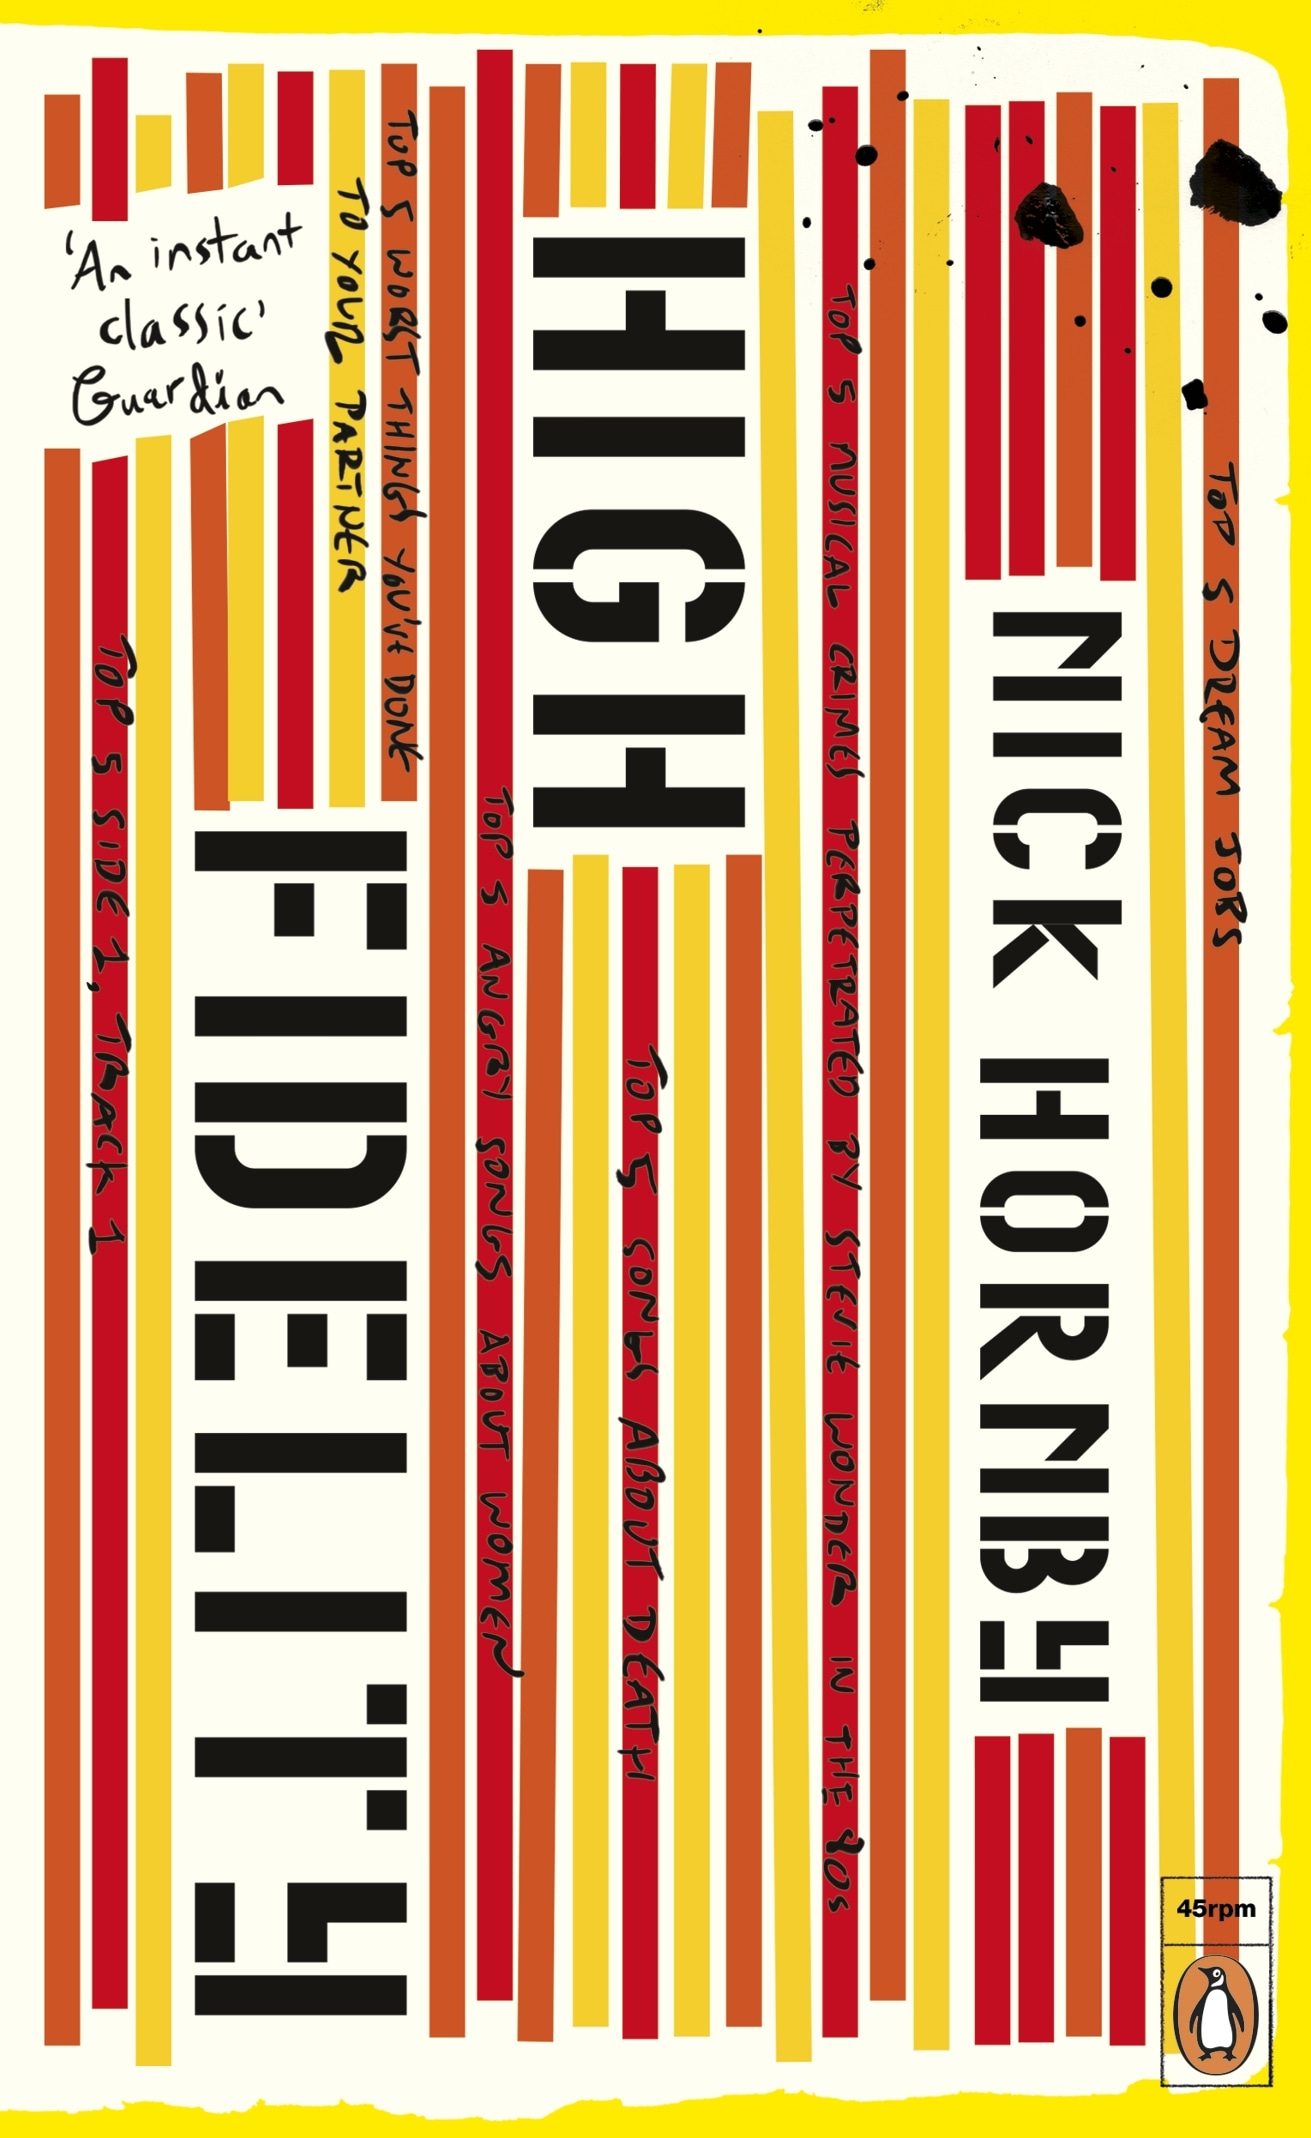 Book “High Fidelity” by Nick Hornby — June 1, 2017